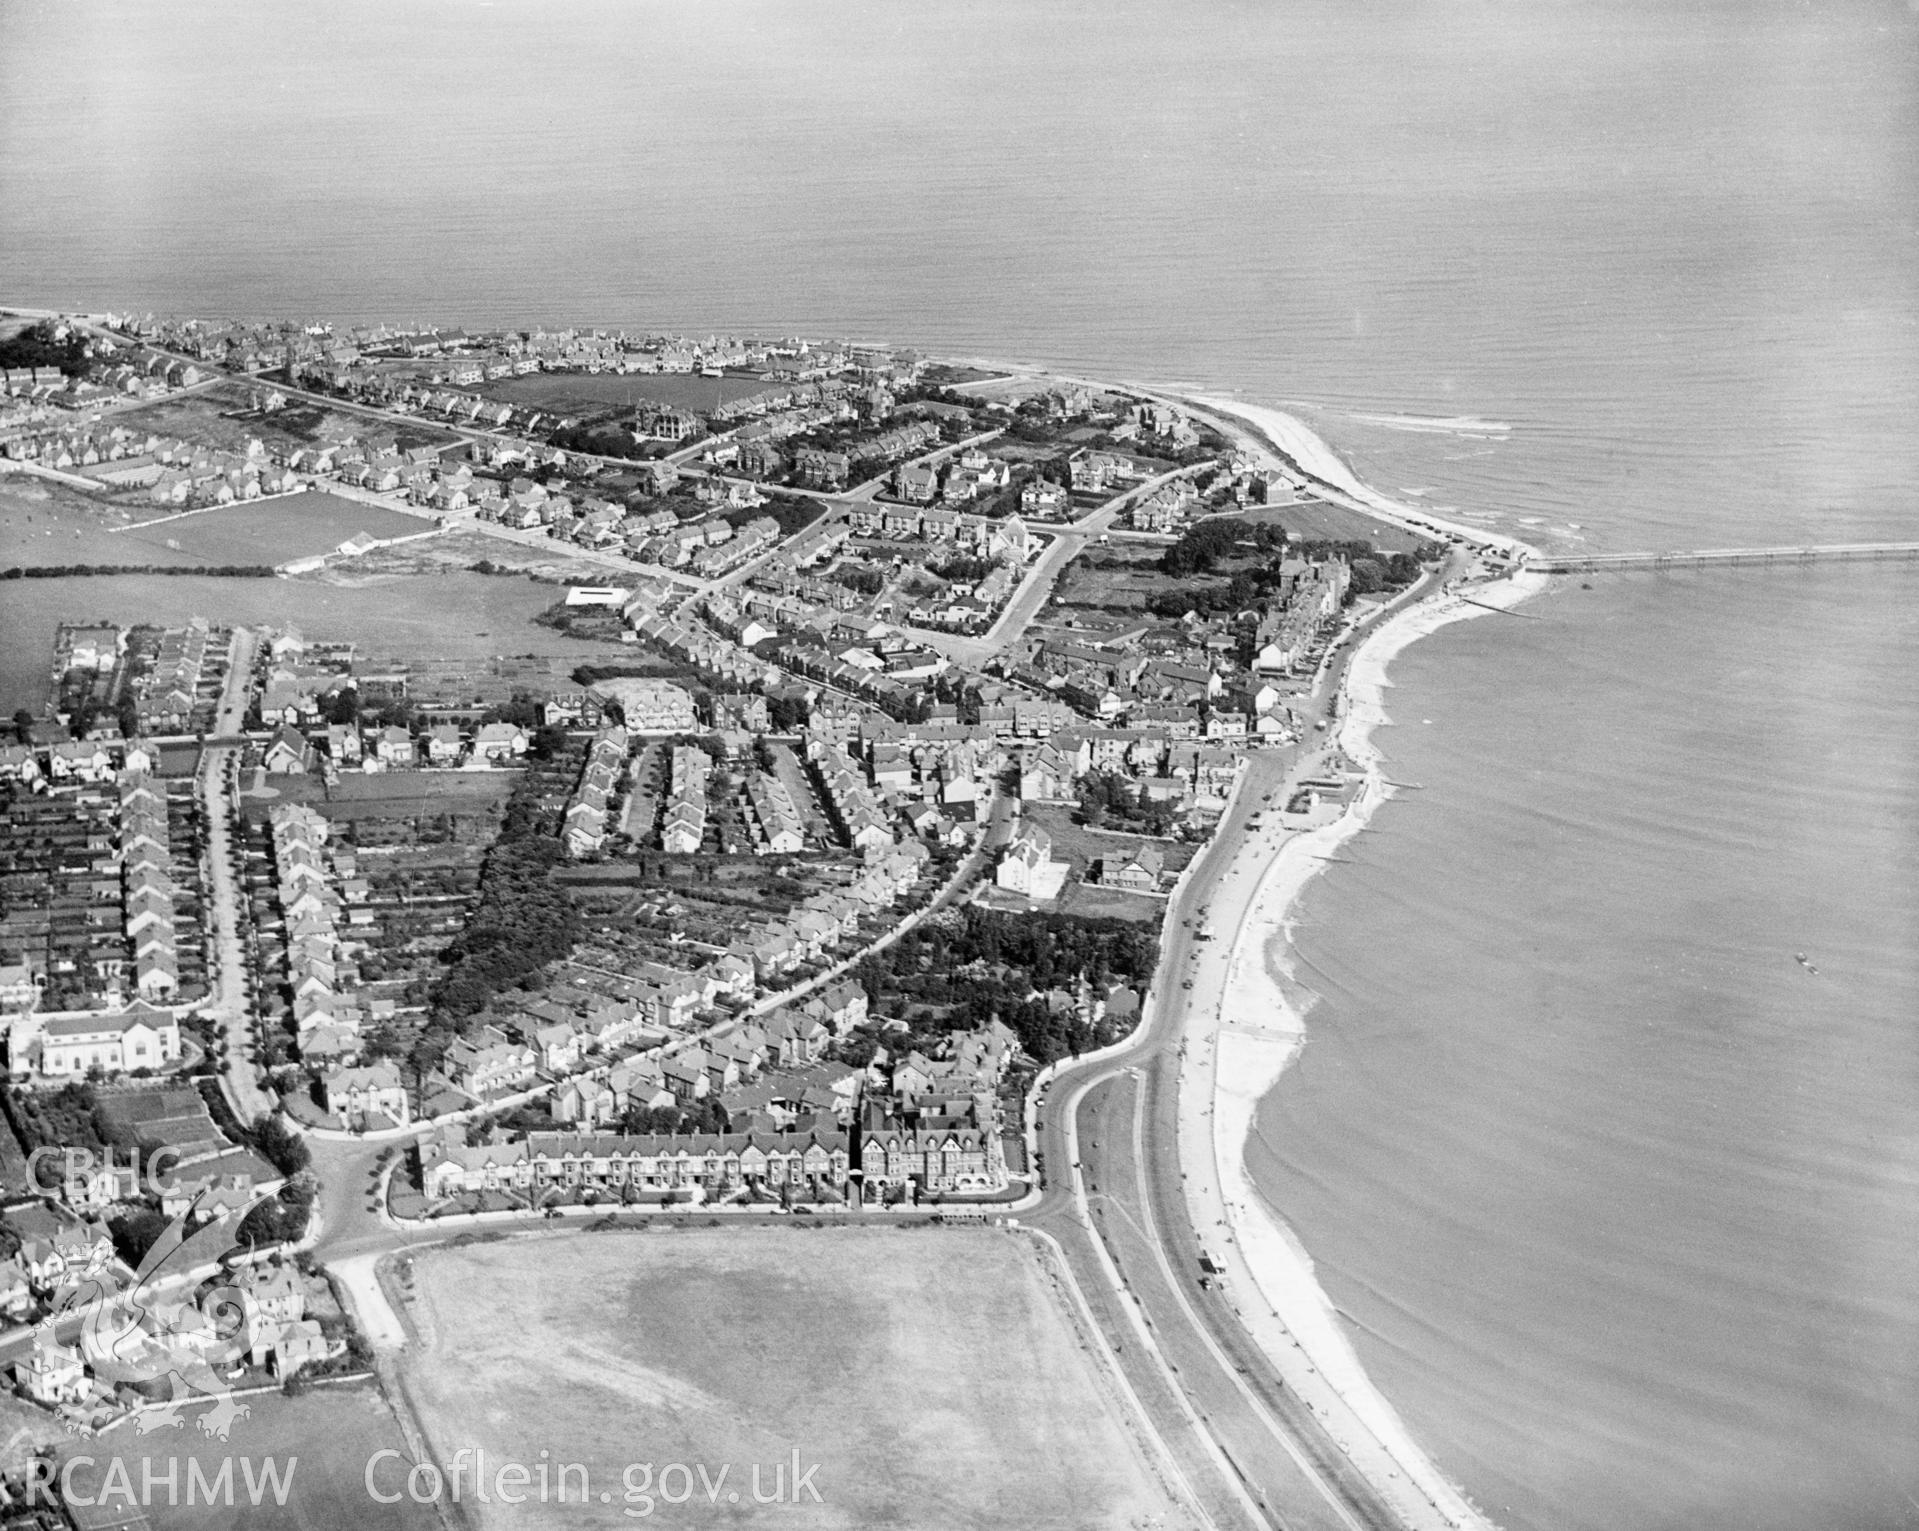 General view of Llandrillo-yn-rhos, oblique aerial view. 5?x4? black and white glass plate negative.